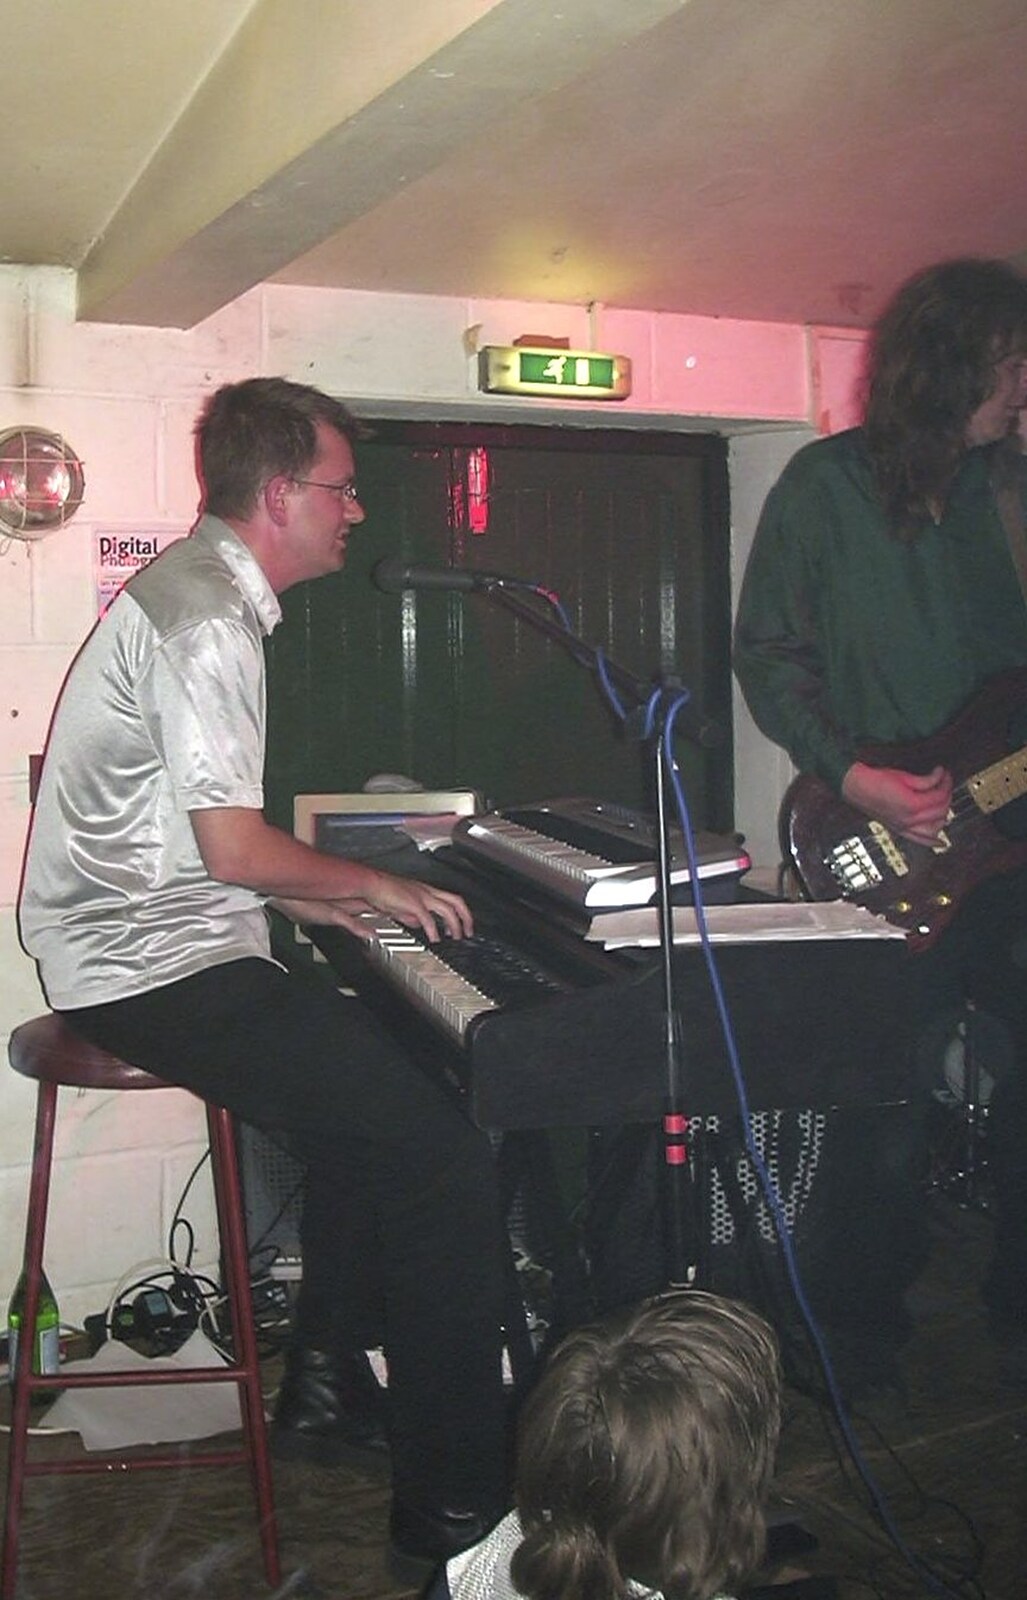 More keyboard action from The BBs at the Cider Shed, Banham, Norfolk - 23rd June 2003